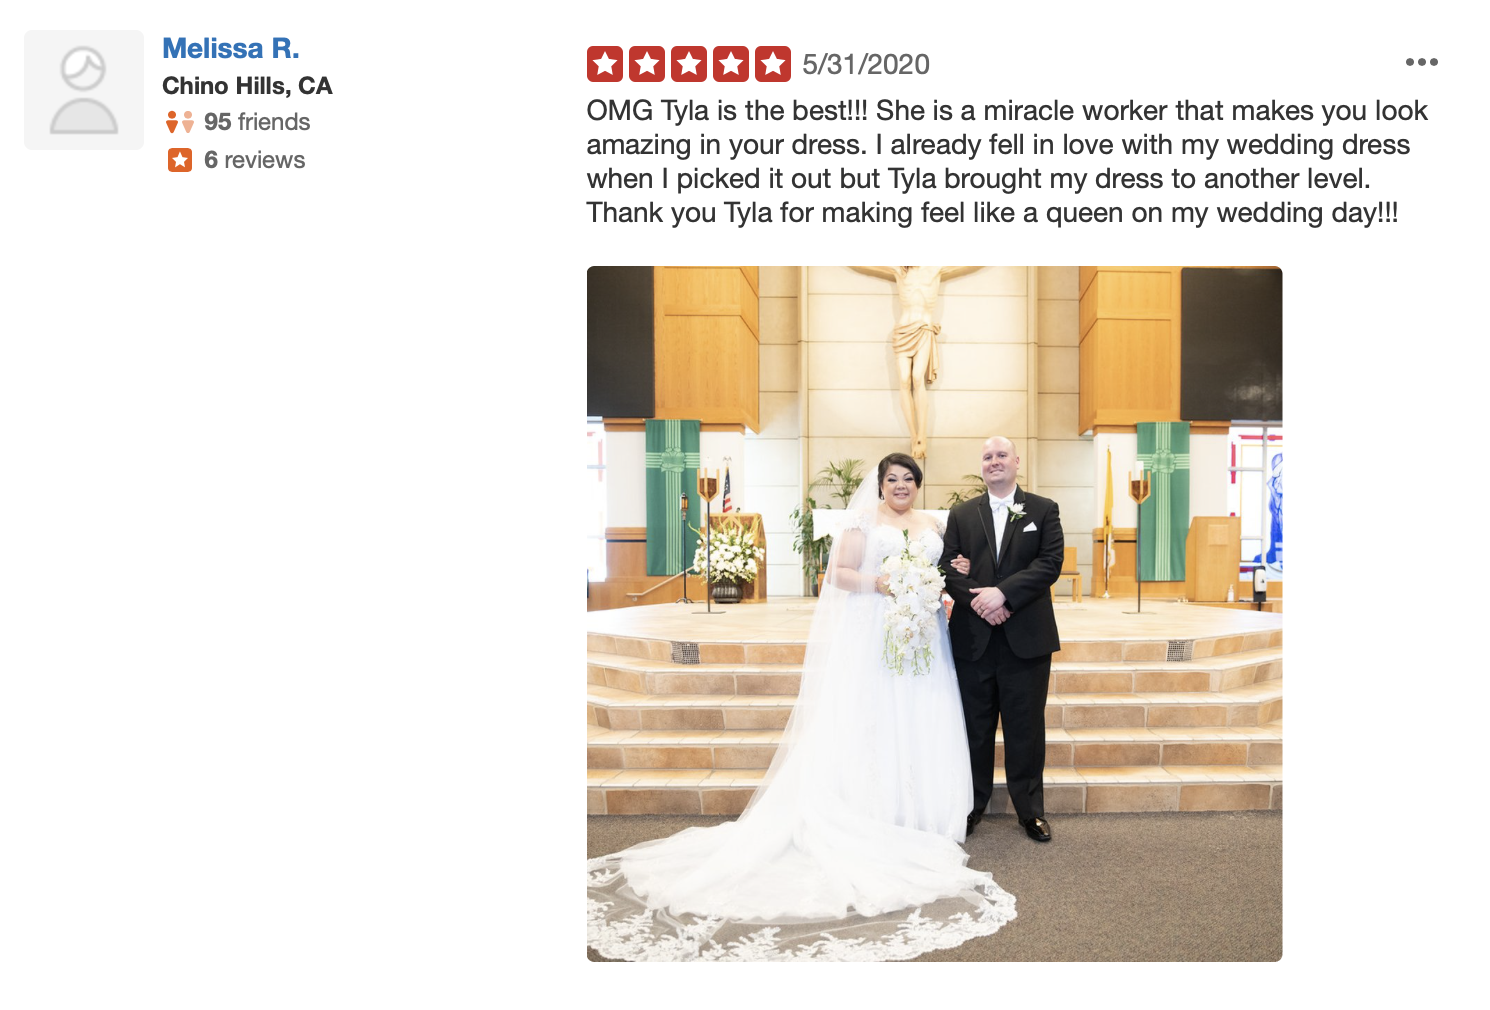 Melissa from chino left a review for tyla's bride, and how tyla is a miracle worker as a seamstress, and how happy she is with her wedding dress alterations. 